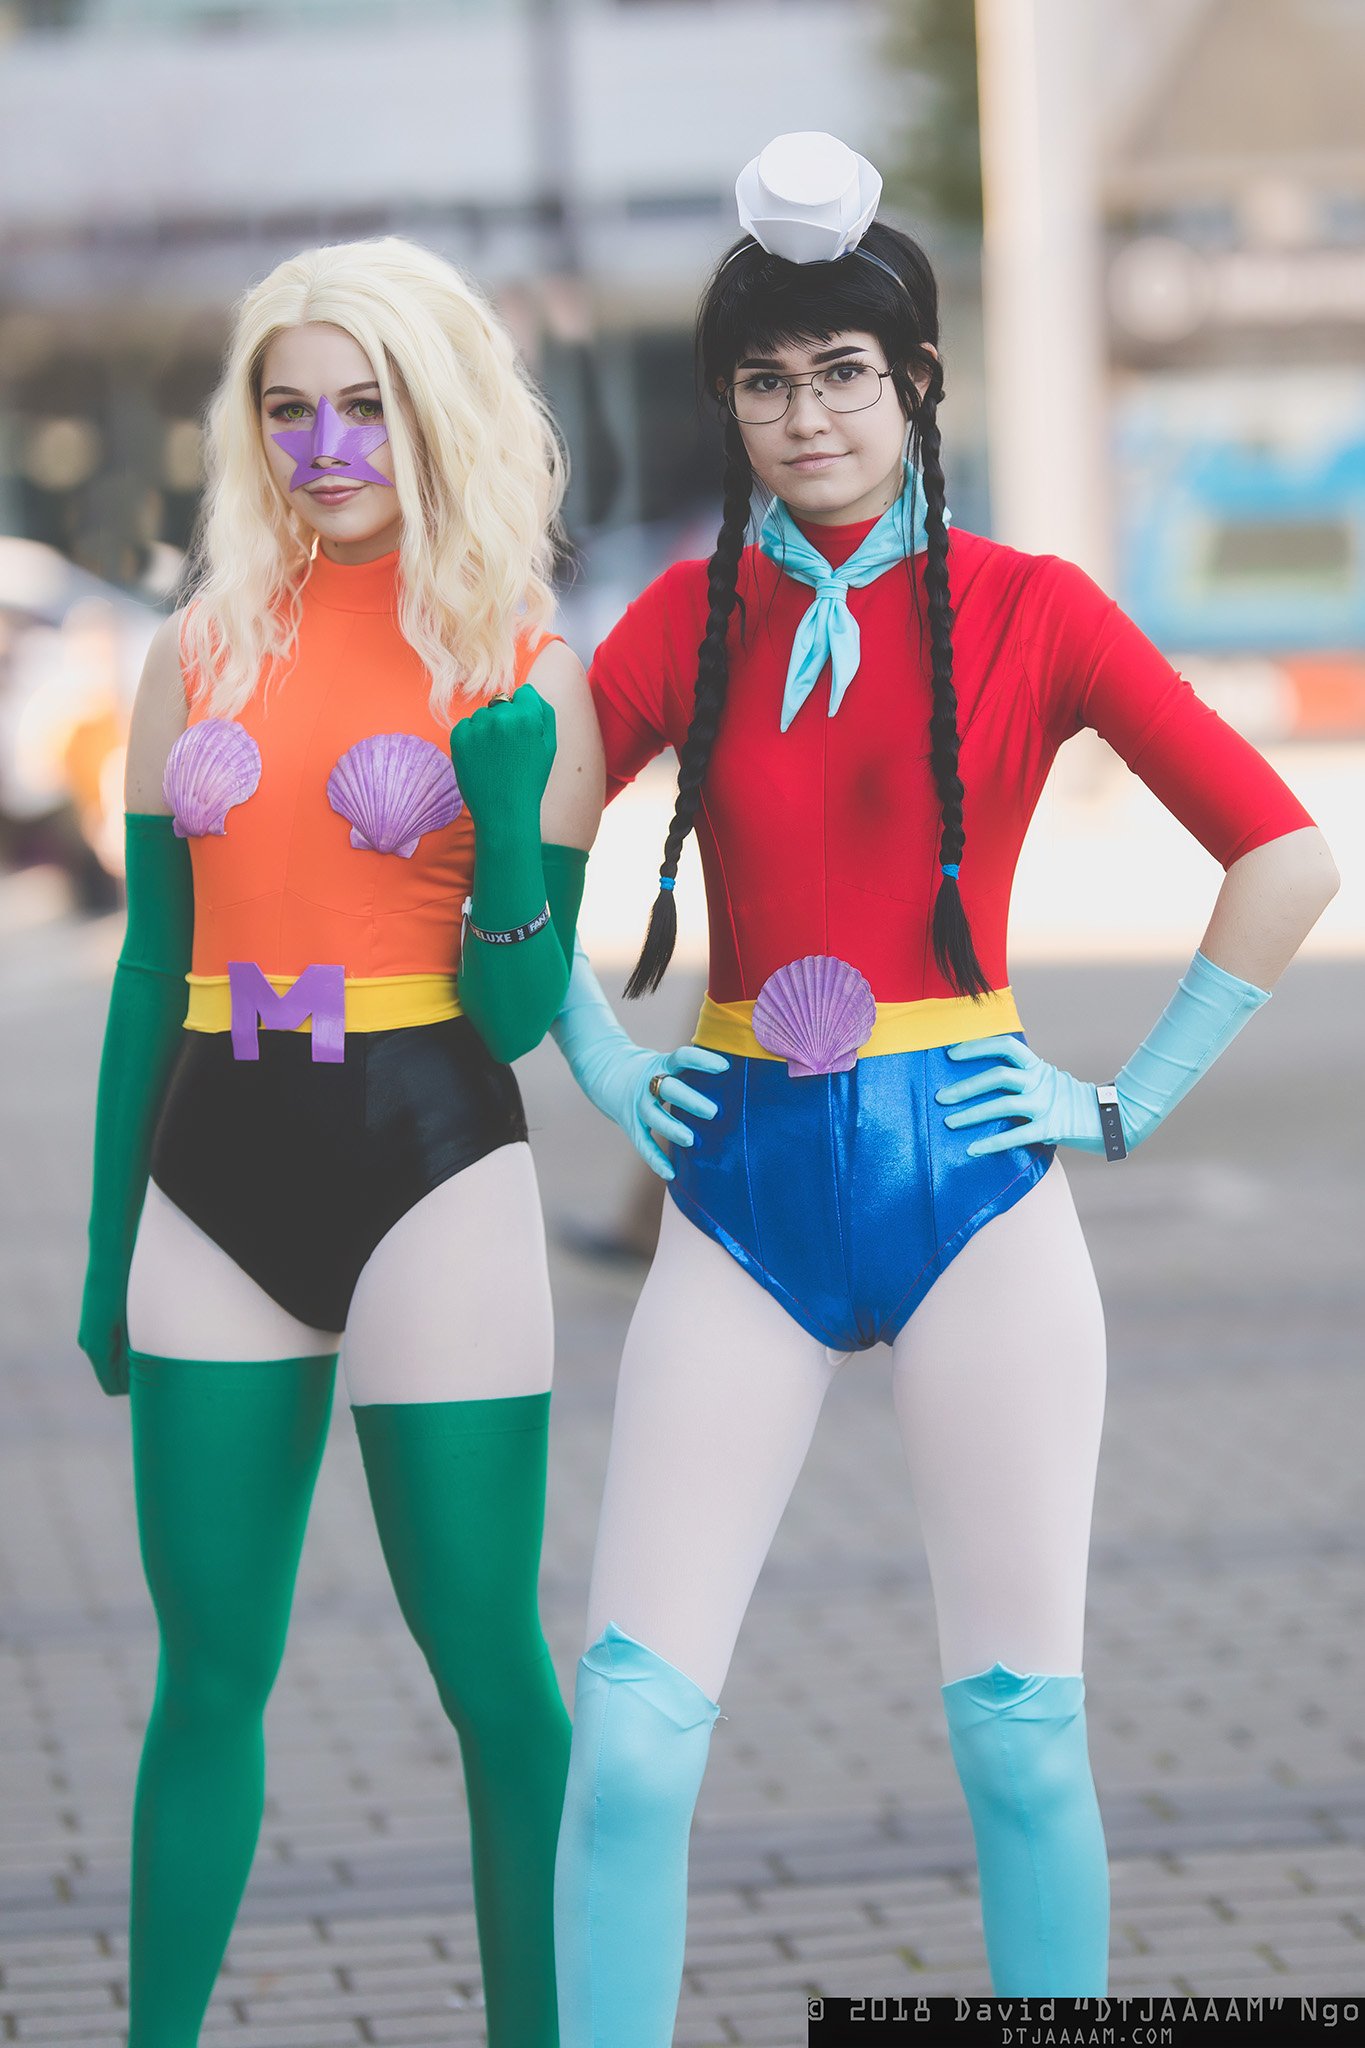 DTJAAAAM on X: "Rule 63 Mermaid Man and Barnacle Boy! Cosplayers: exaltcosplay (https://t.co/2bDkab6Lma) and dippyperry (https://t.co/sLkKbvNfgm) #cosplay #fanexpo #fanexpovancouver #fanexpovancouver2018 https://t.co/boW97xGM36" / X